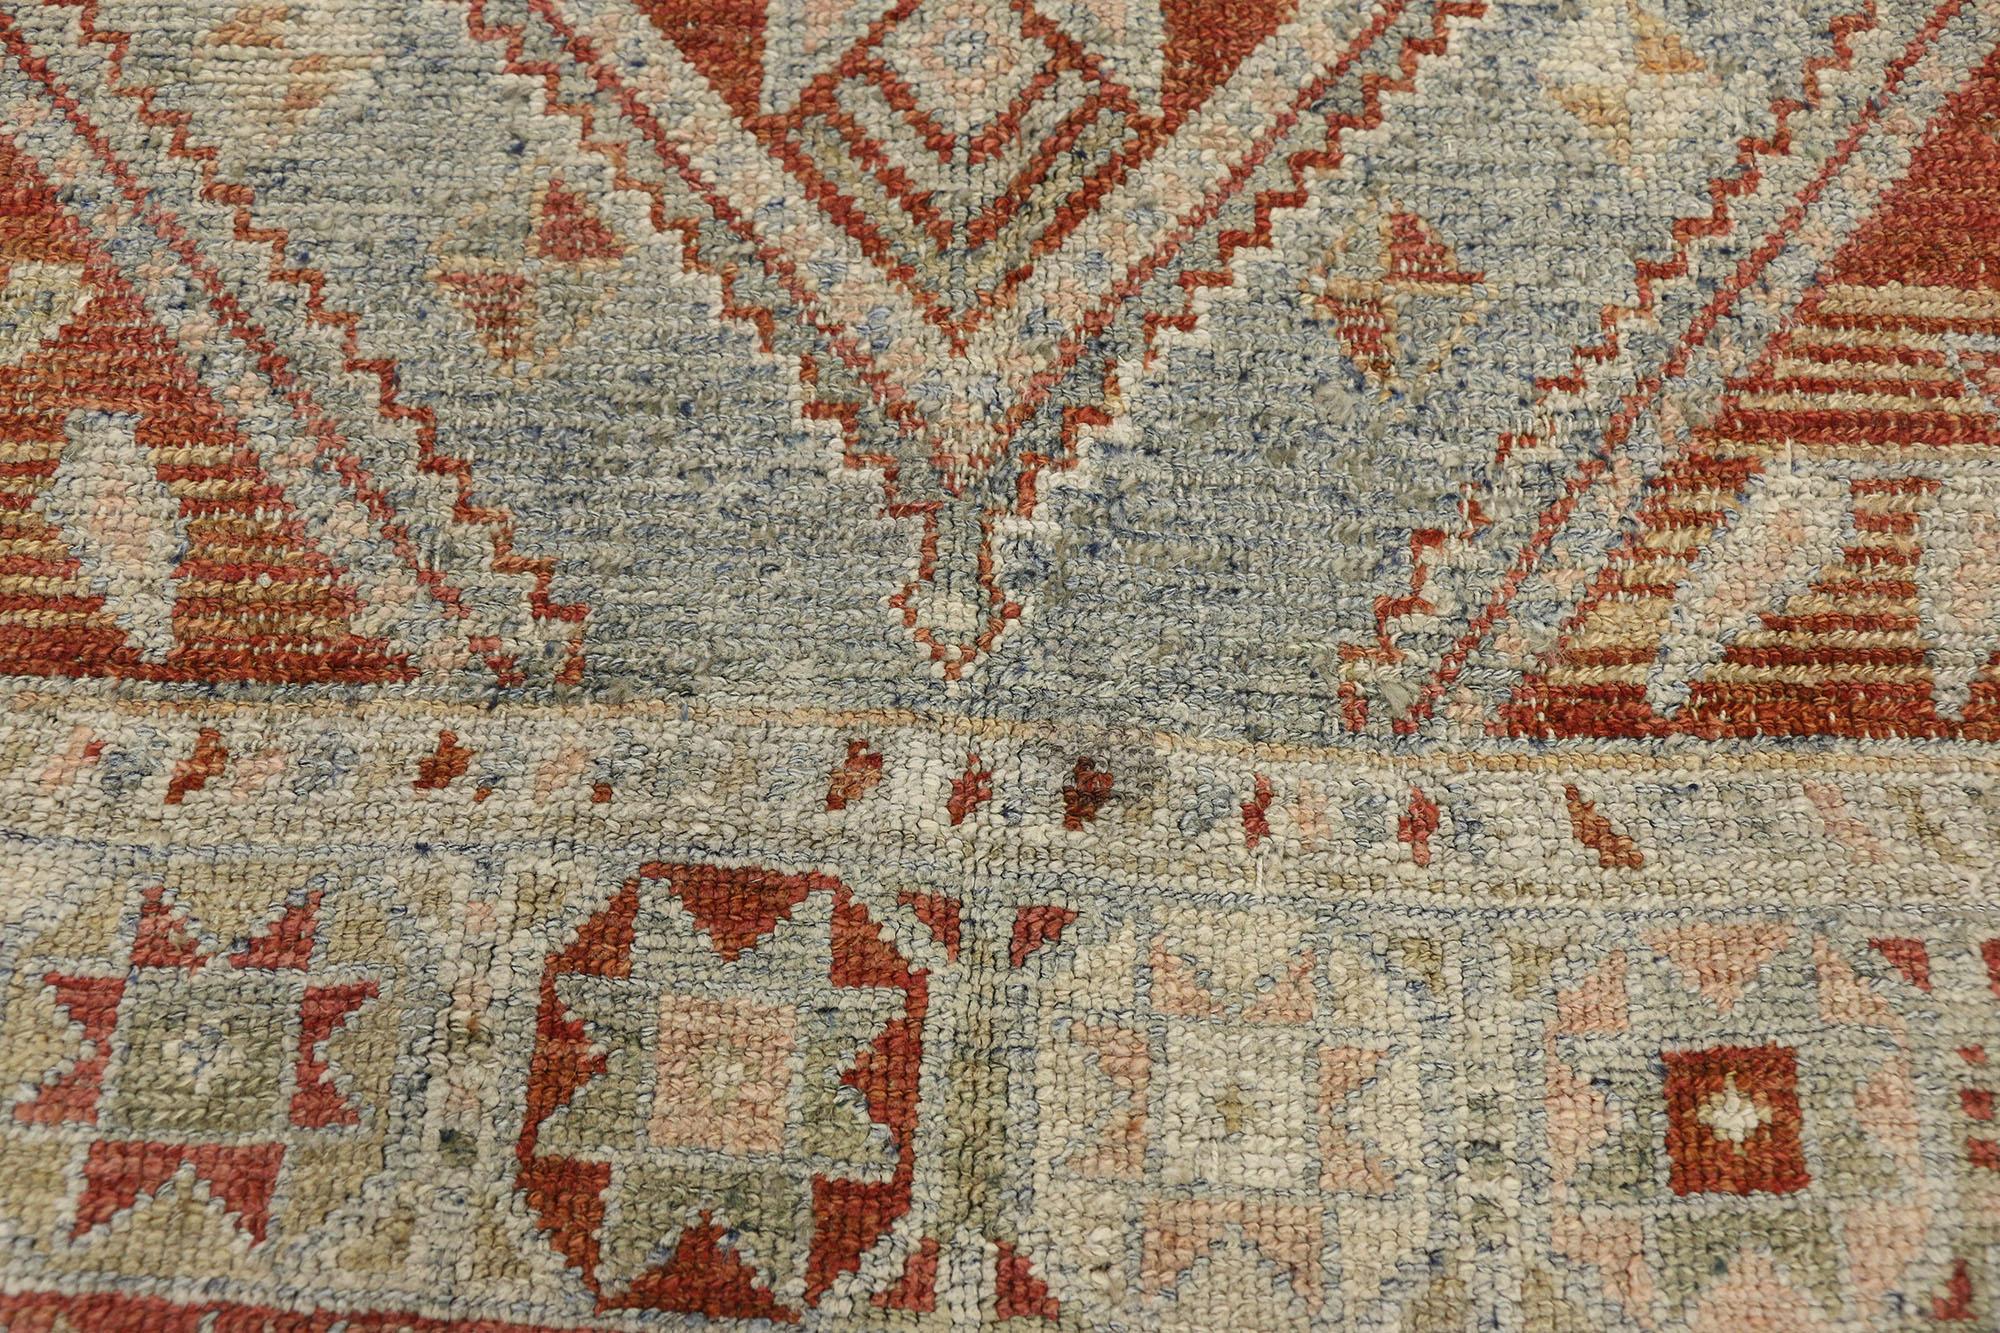 Rustic Antique Persian Shiraz Rug with Faded Earth-Tone Colors